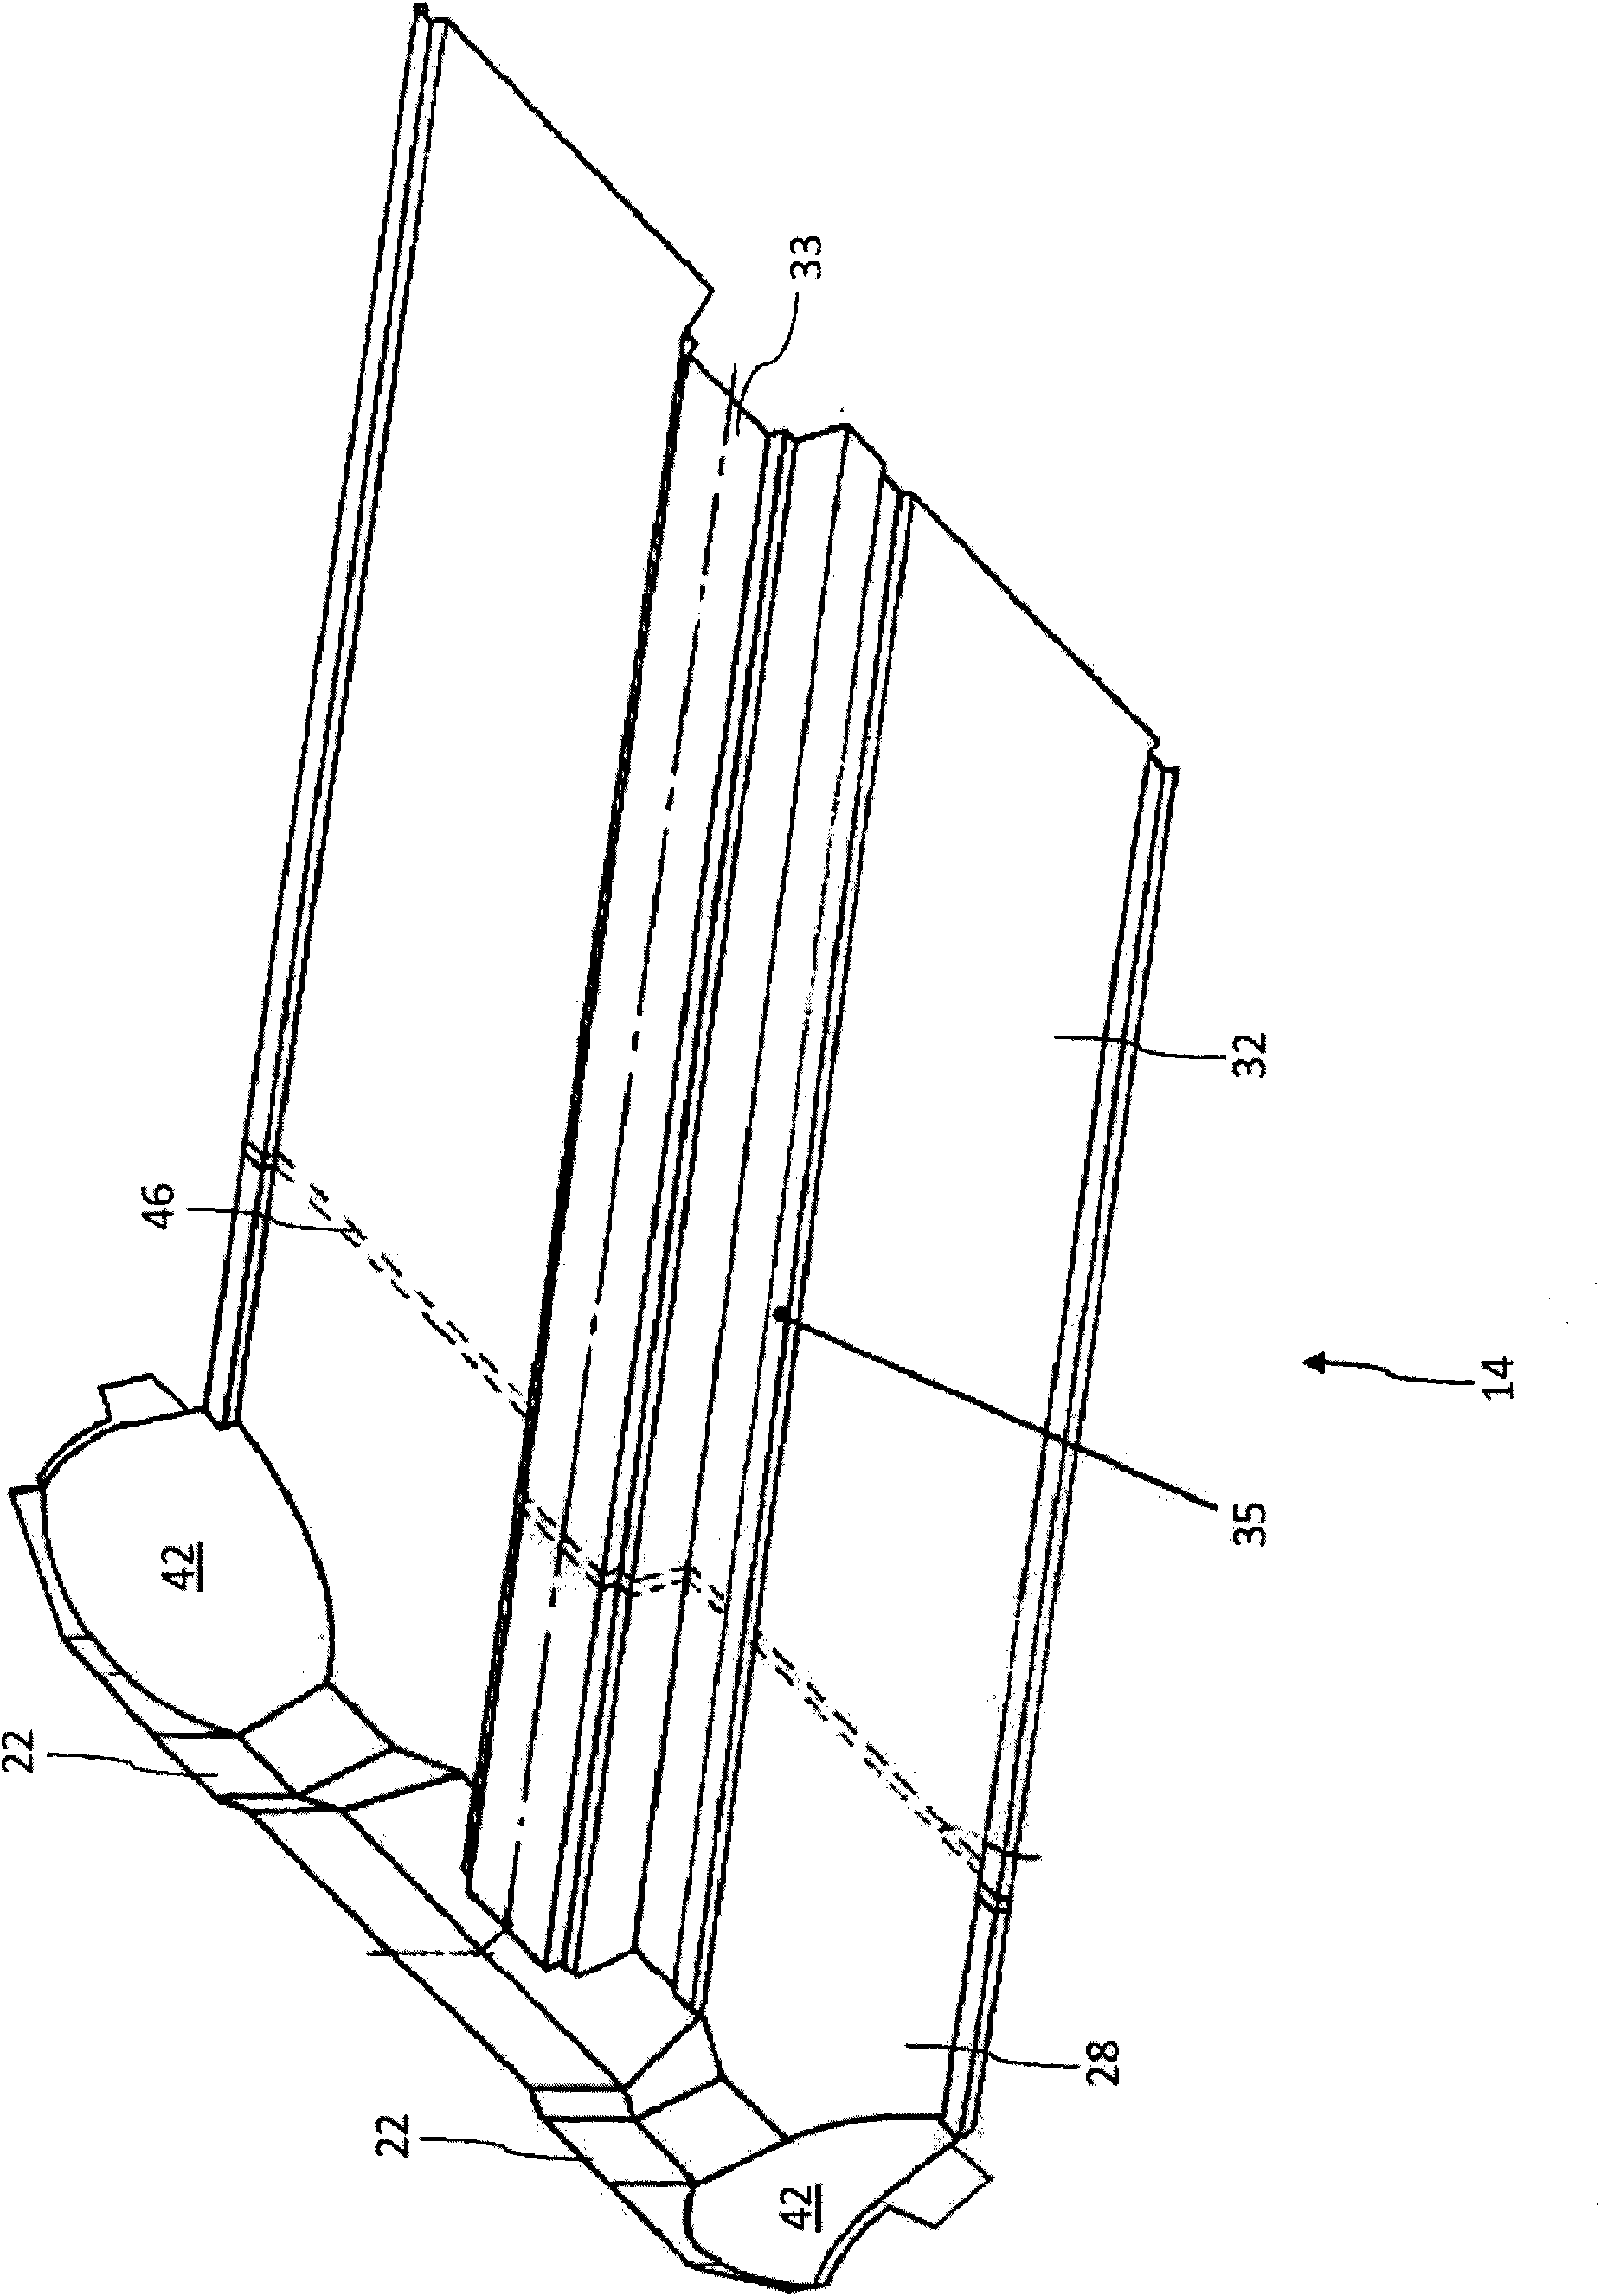 Chassis structure of a motor vehicle body